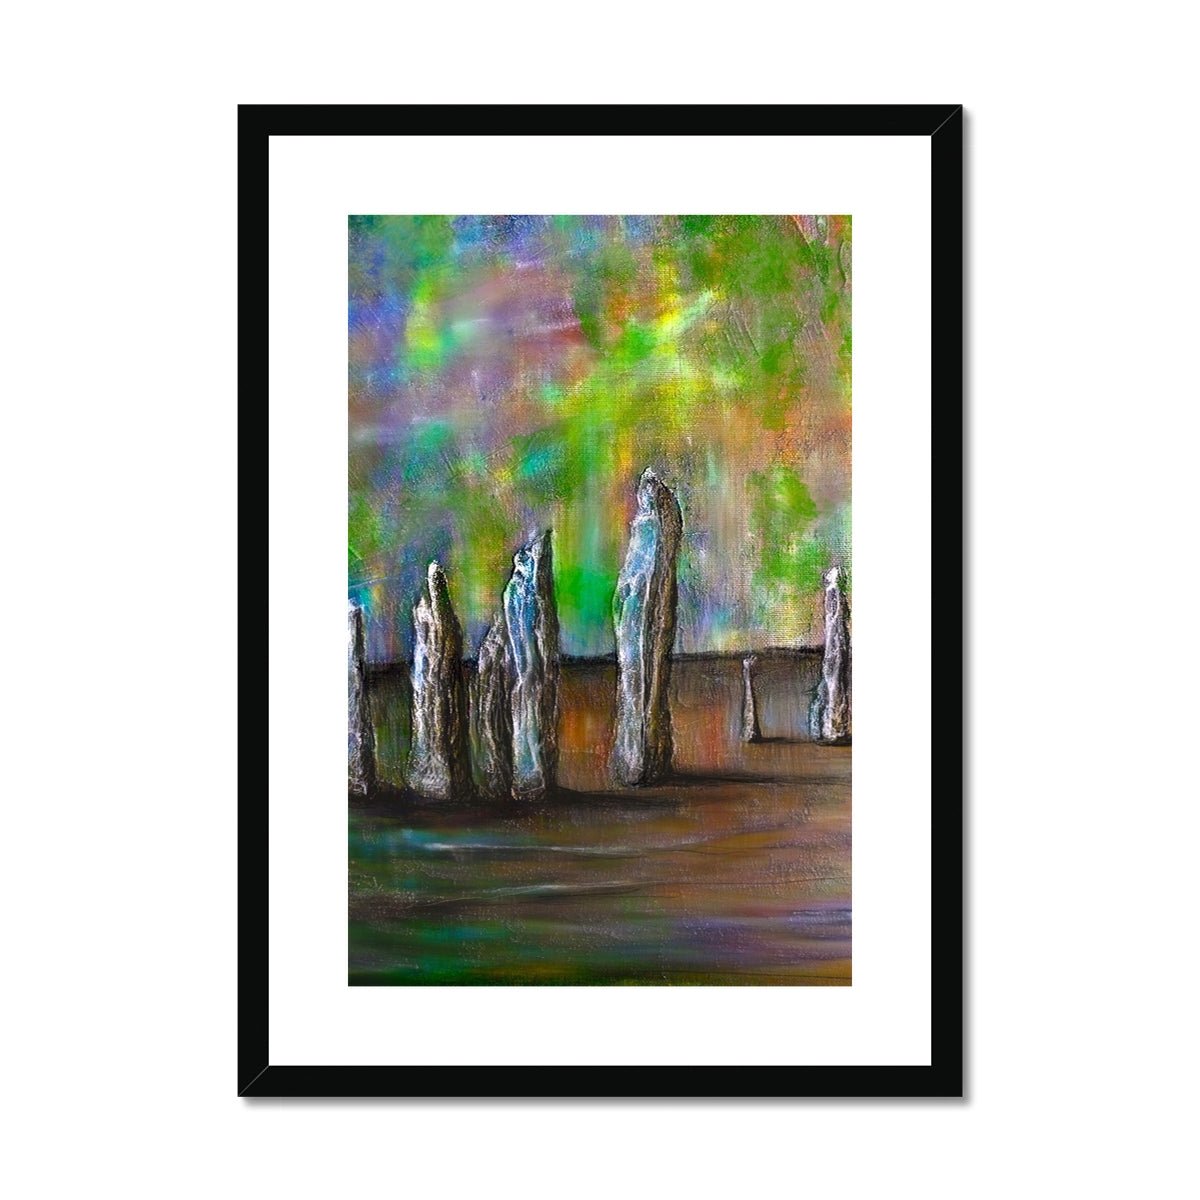 Callanish Northern Lights Lewis Painting | Framed & Mounted Prints From Scotland-Framed & Mounted Prints-Hebridean Islands Art Gallery-A2 Portrait-Black Frame-Paintings, Prints, Homeware, Art Gifts From Scotland By Scottish Artist Kevin Hunter